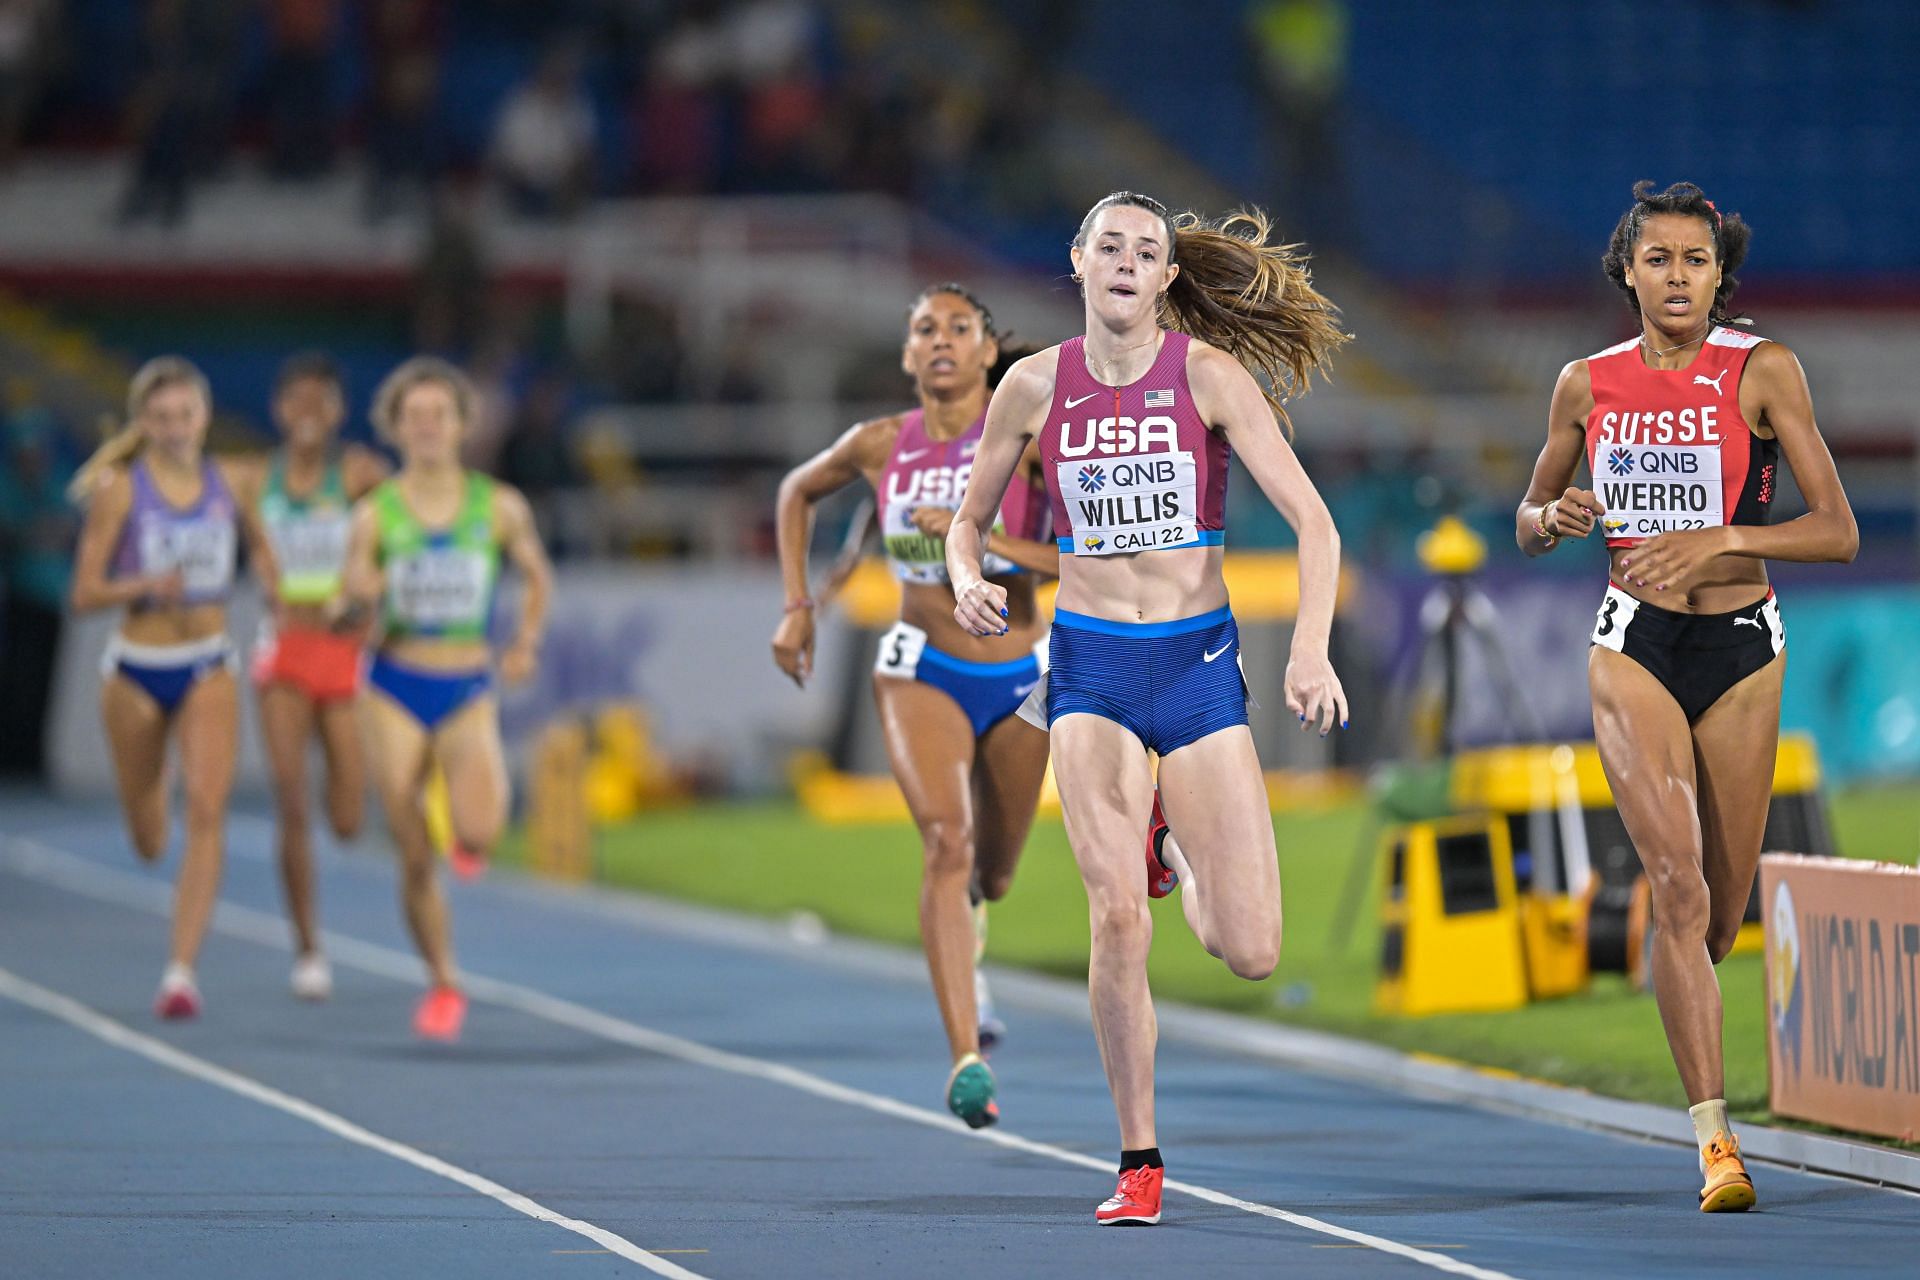 Roisin Willis (2R) of Team USA competes in the Women&#039;s 800m Final on day three of the World Athletics U20 Championships Cali 2022